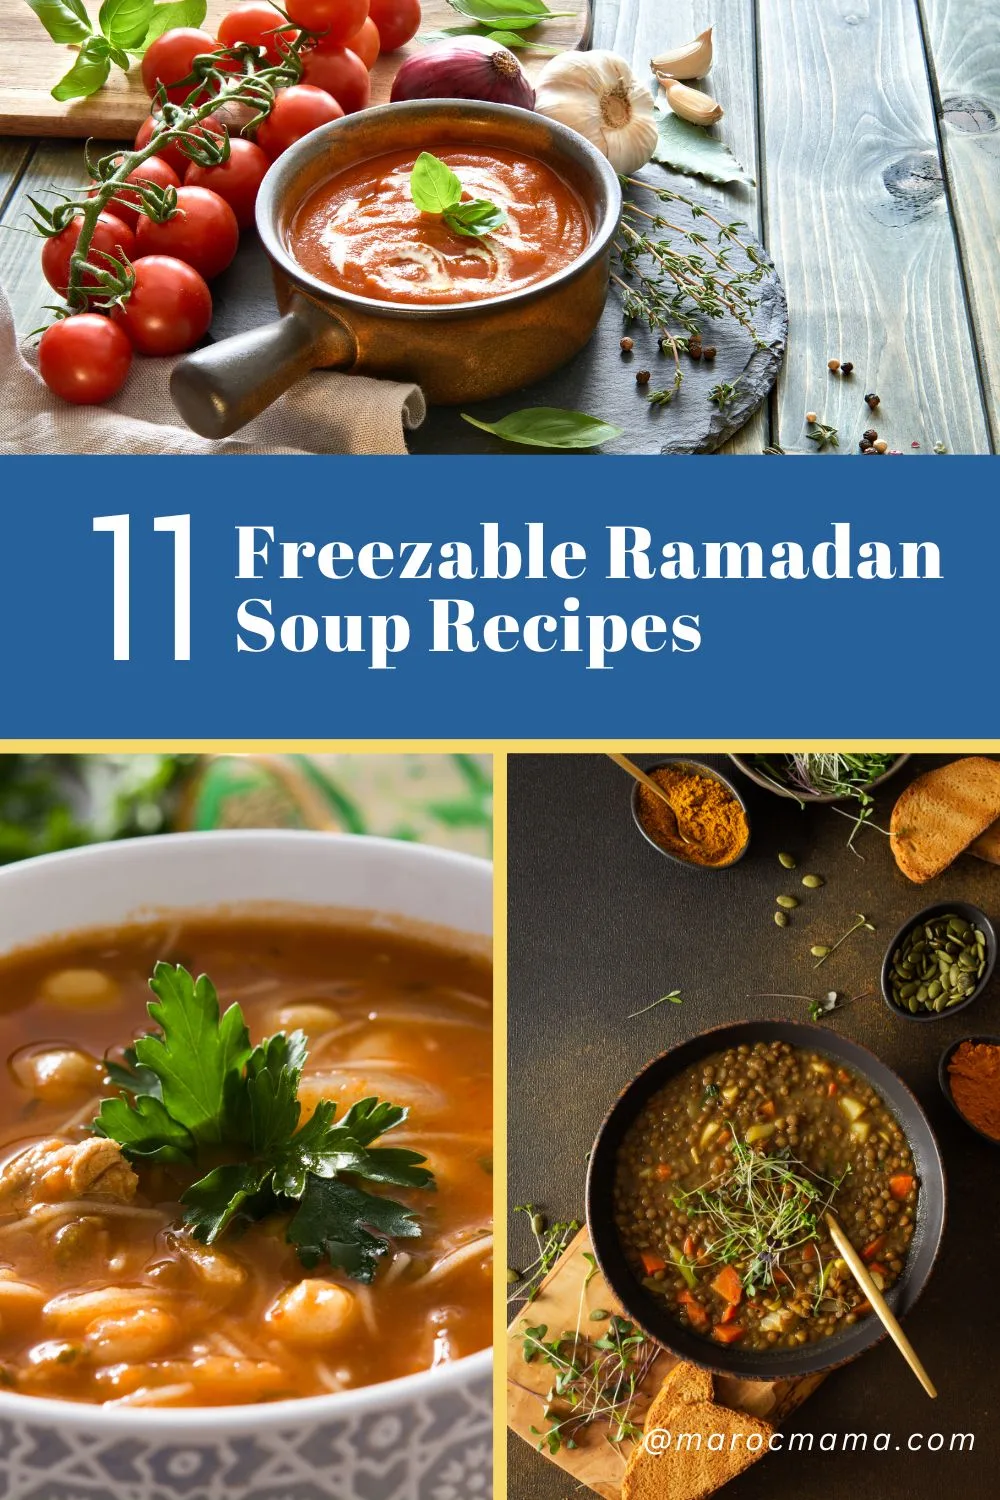 Tomato basil soup, harira soup and lentil tortilla soup served in bowls with the text 11 Freezable Ramadan Soup Recipes